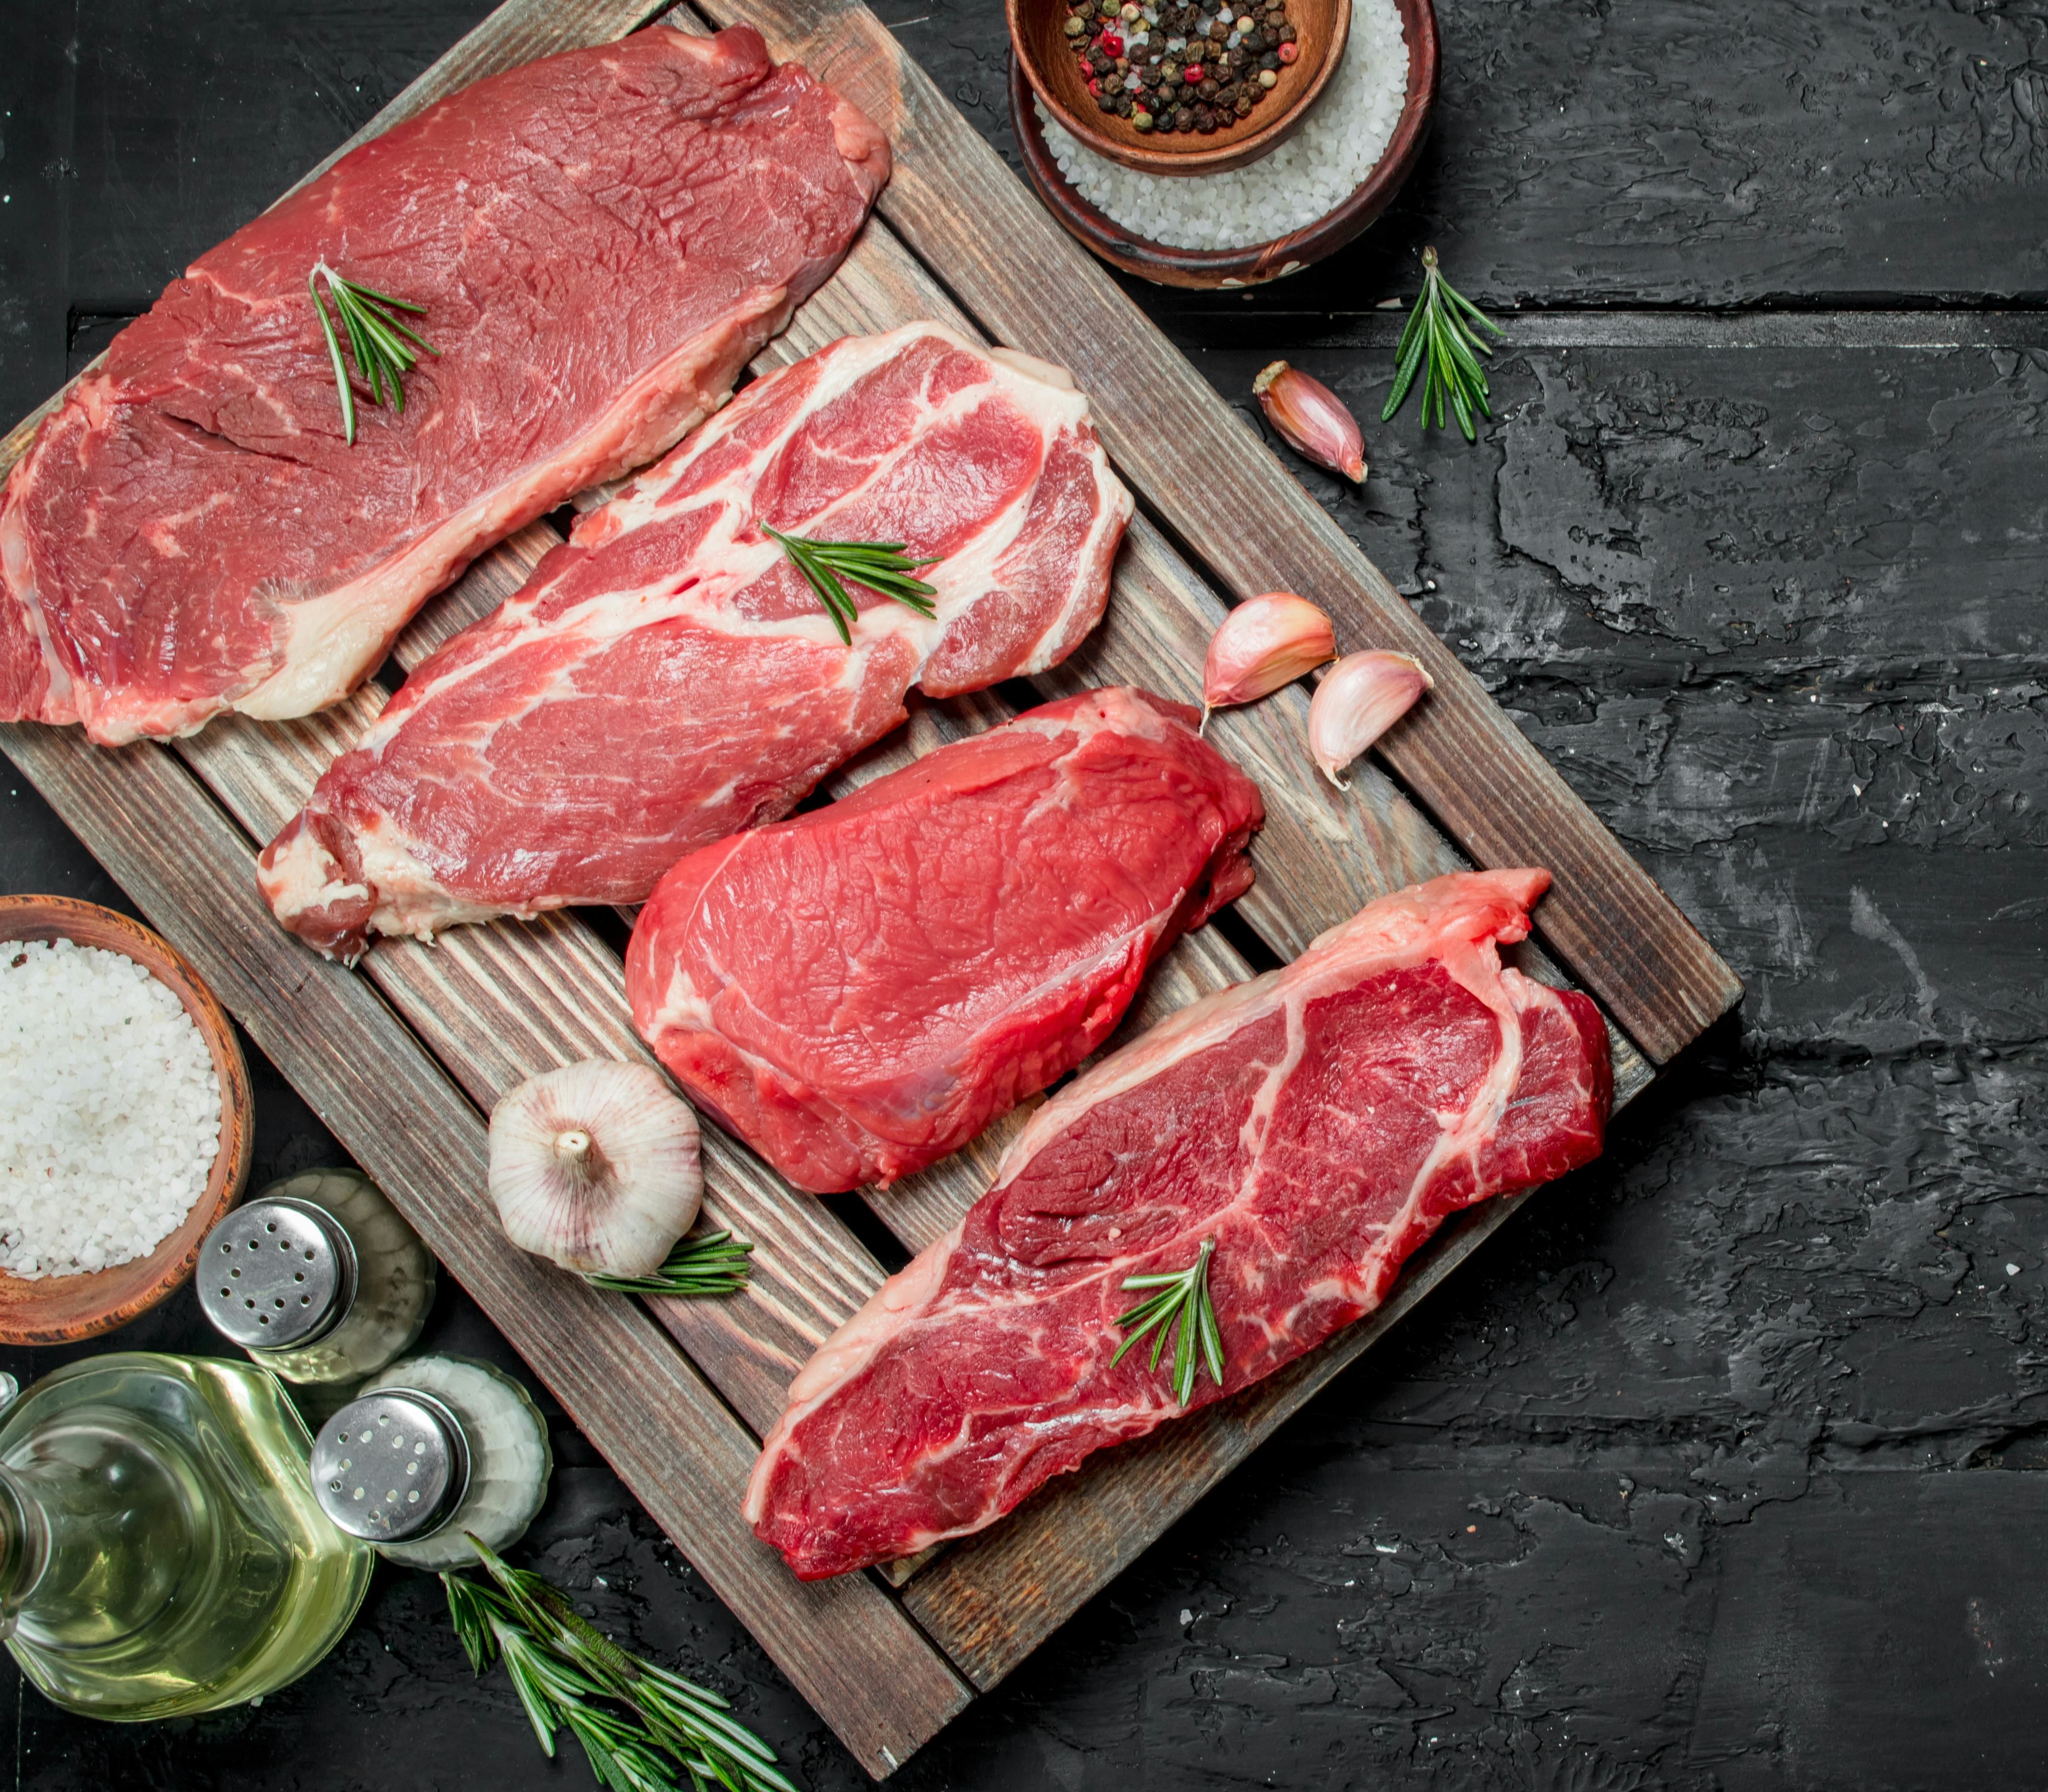 Four cuts of uncooked meat are resting on a wooden board. Salt, pepper and other seasonings are next to the board.